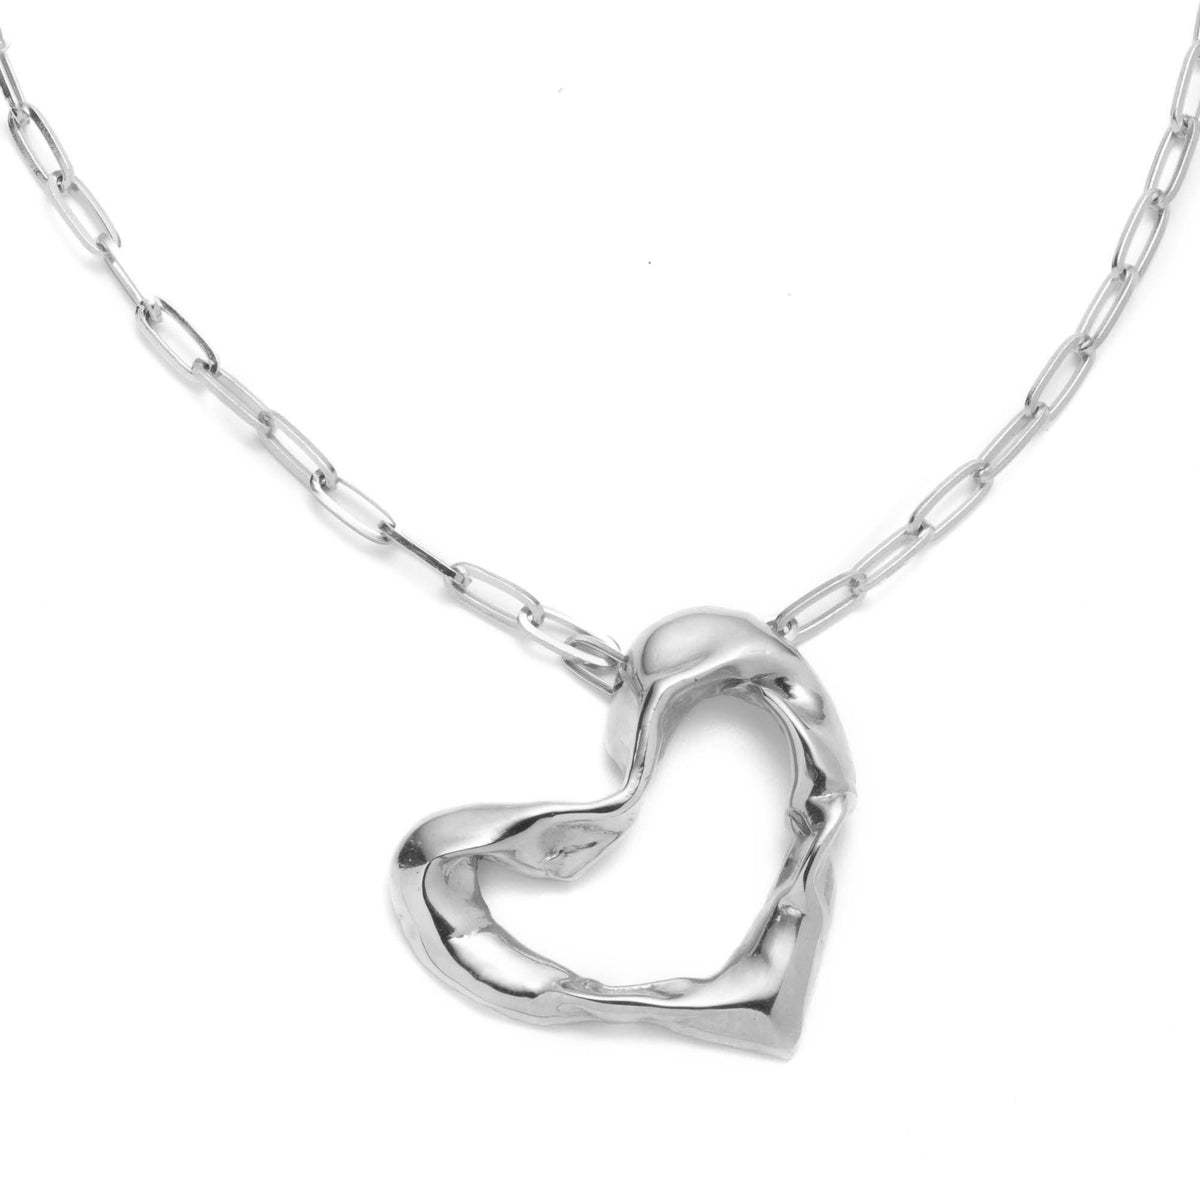 Molton Heart Necklace Silver Sterling King